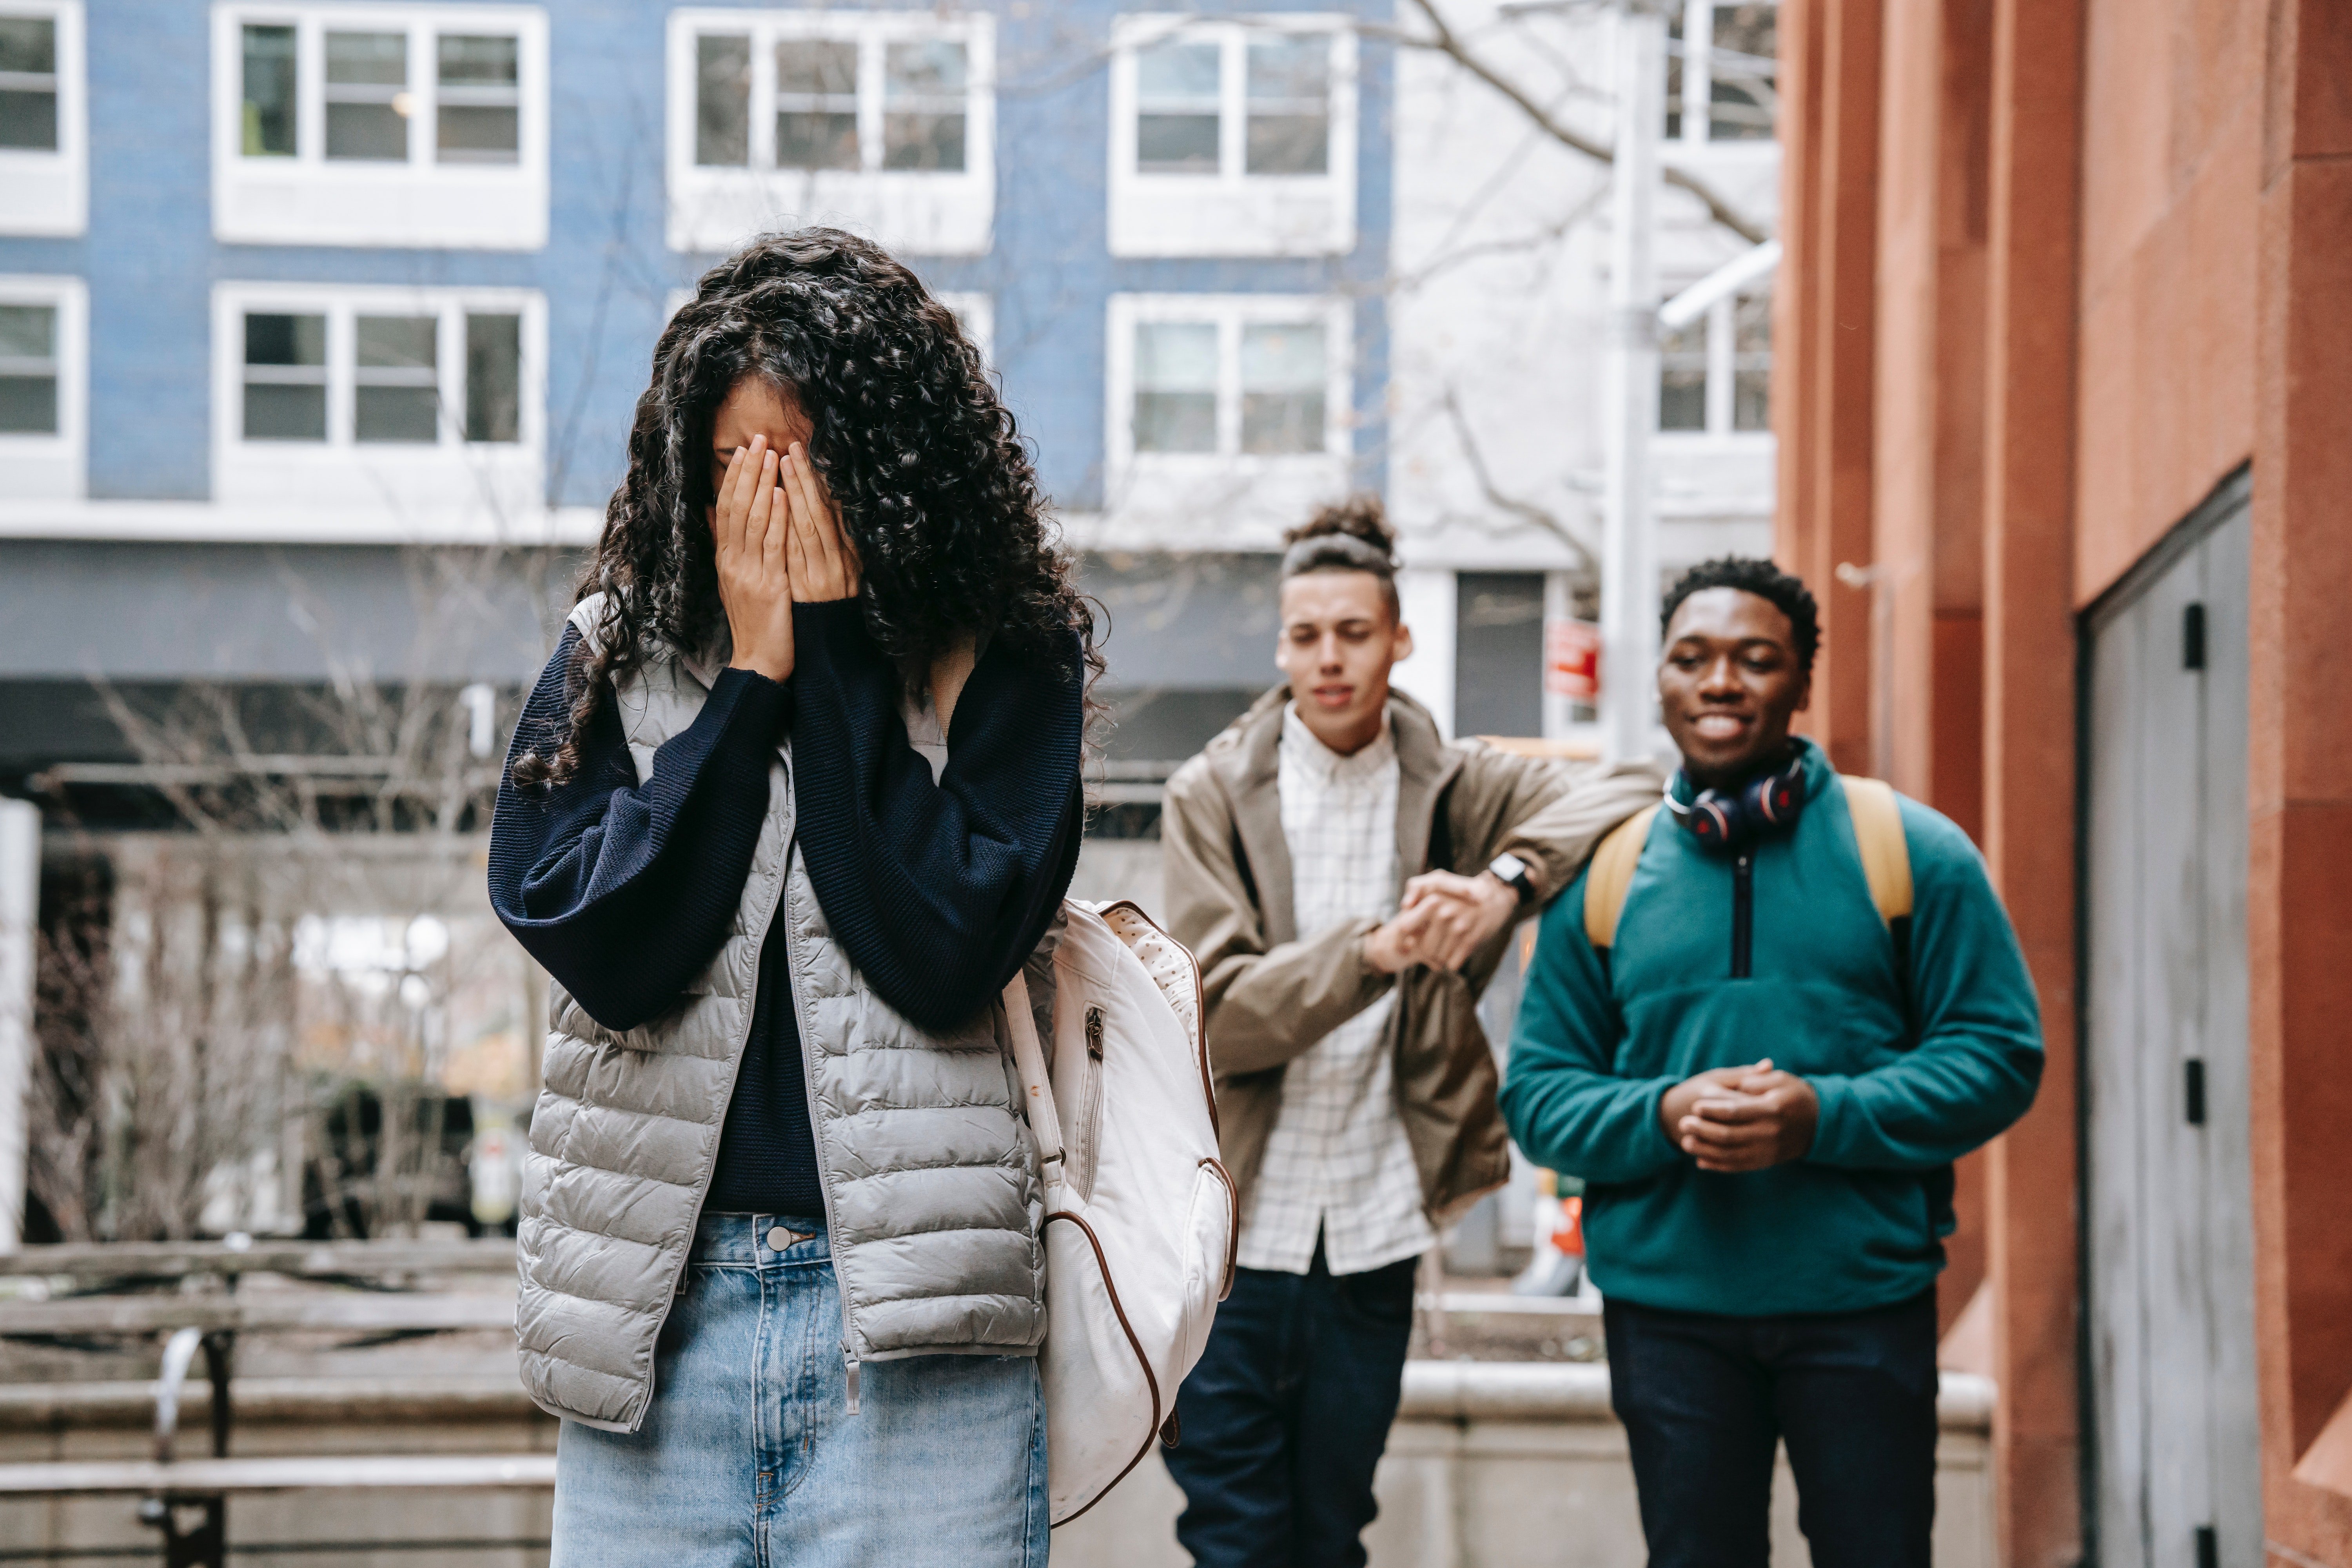 Pictured - Two male teens bullying a young woman who covers her face | Source: Pexels